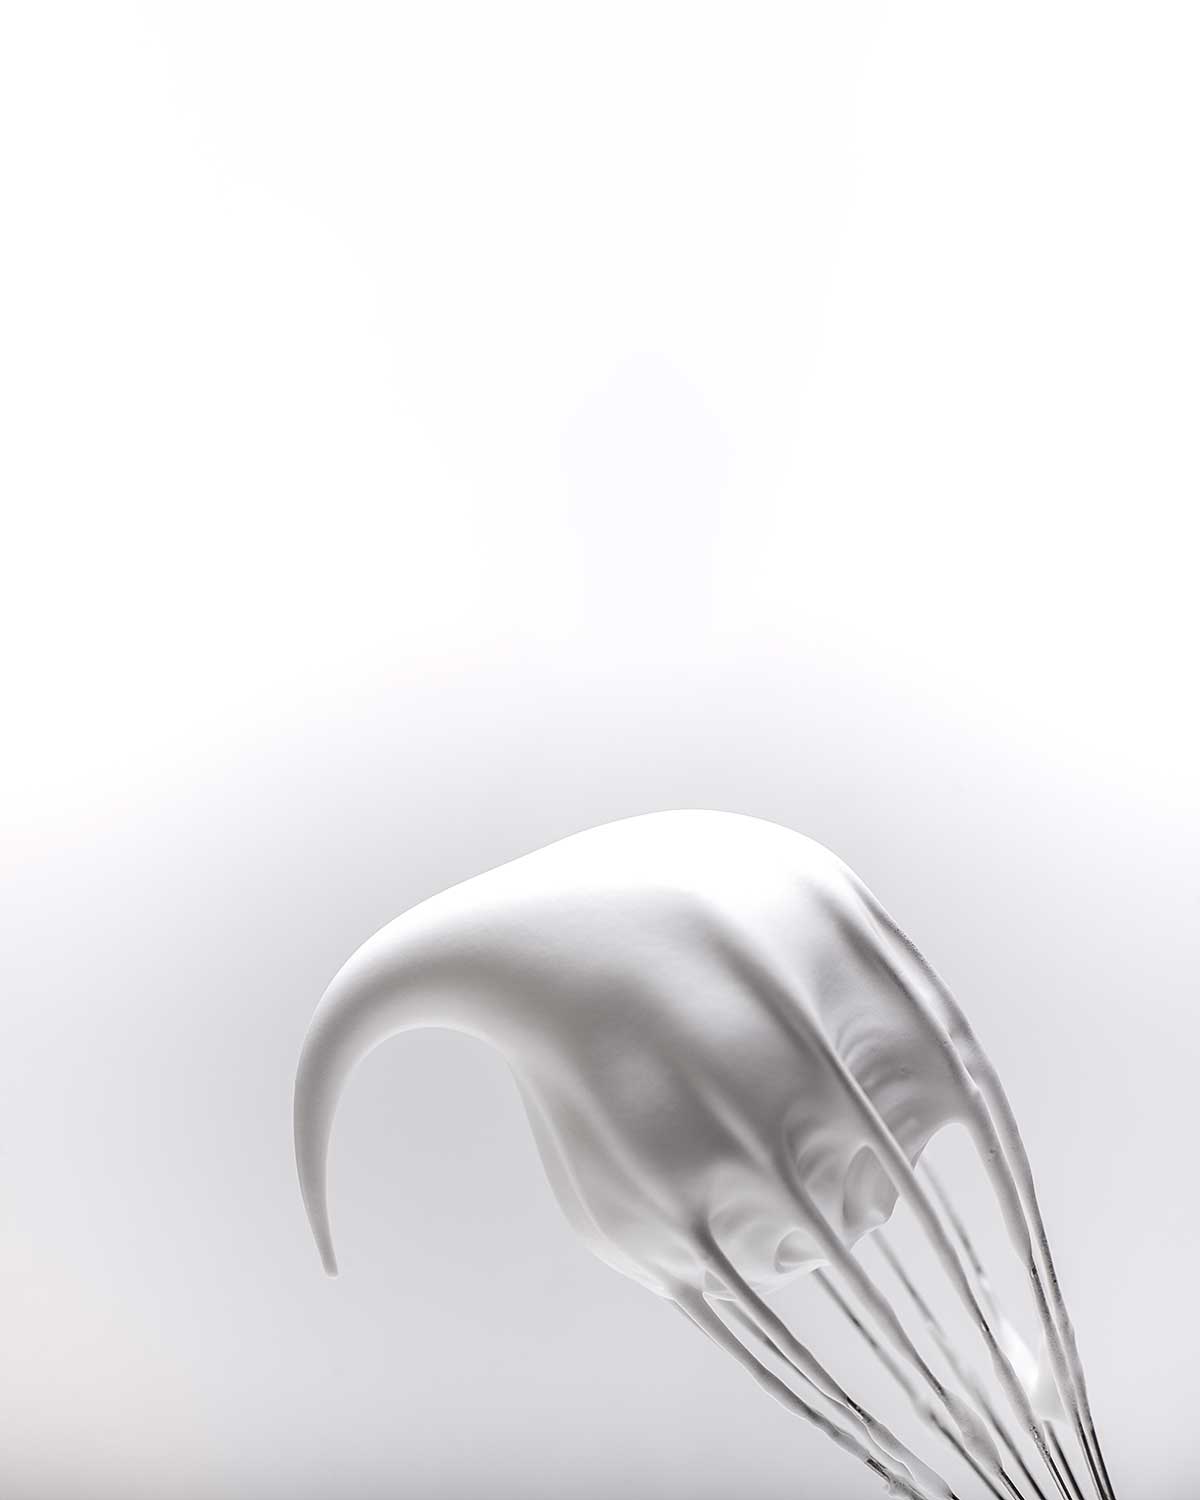 Meringue on a whisk, as illustration of the difference between French, Italian, and Swiss meringues.